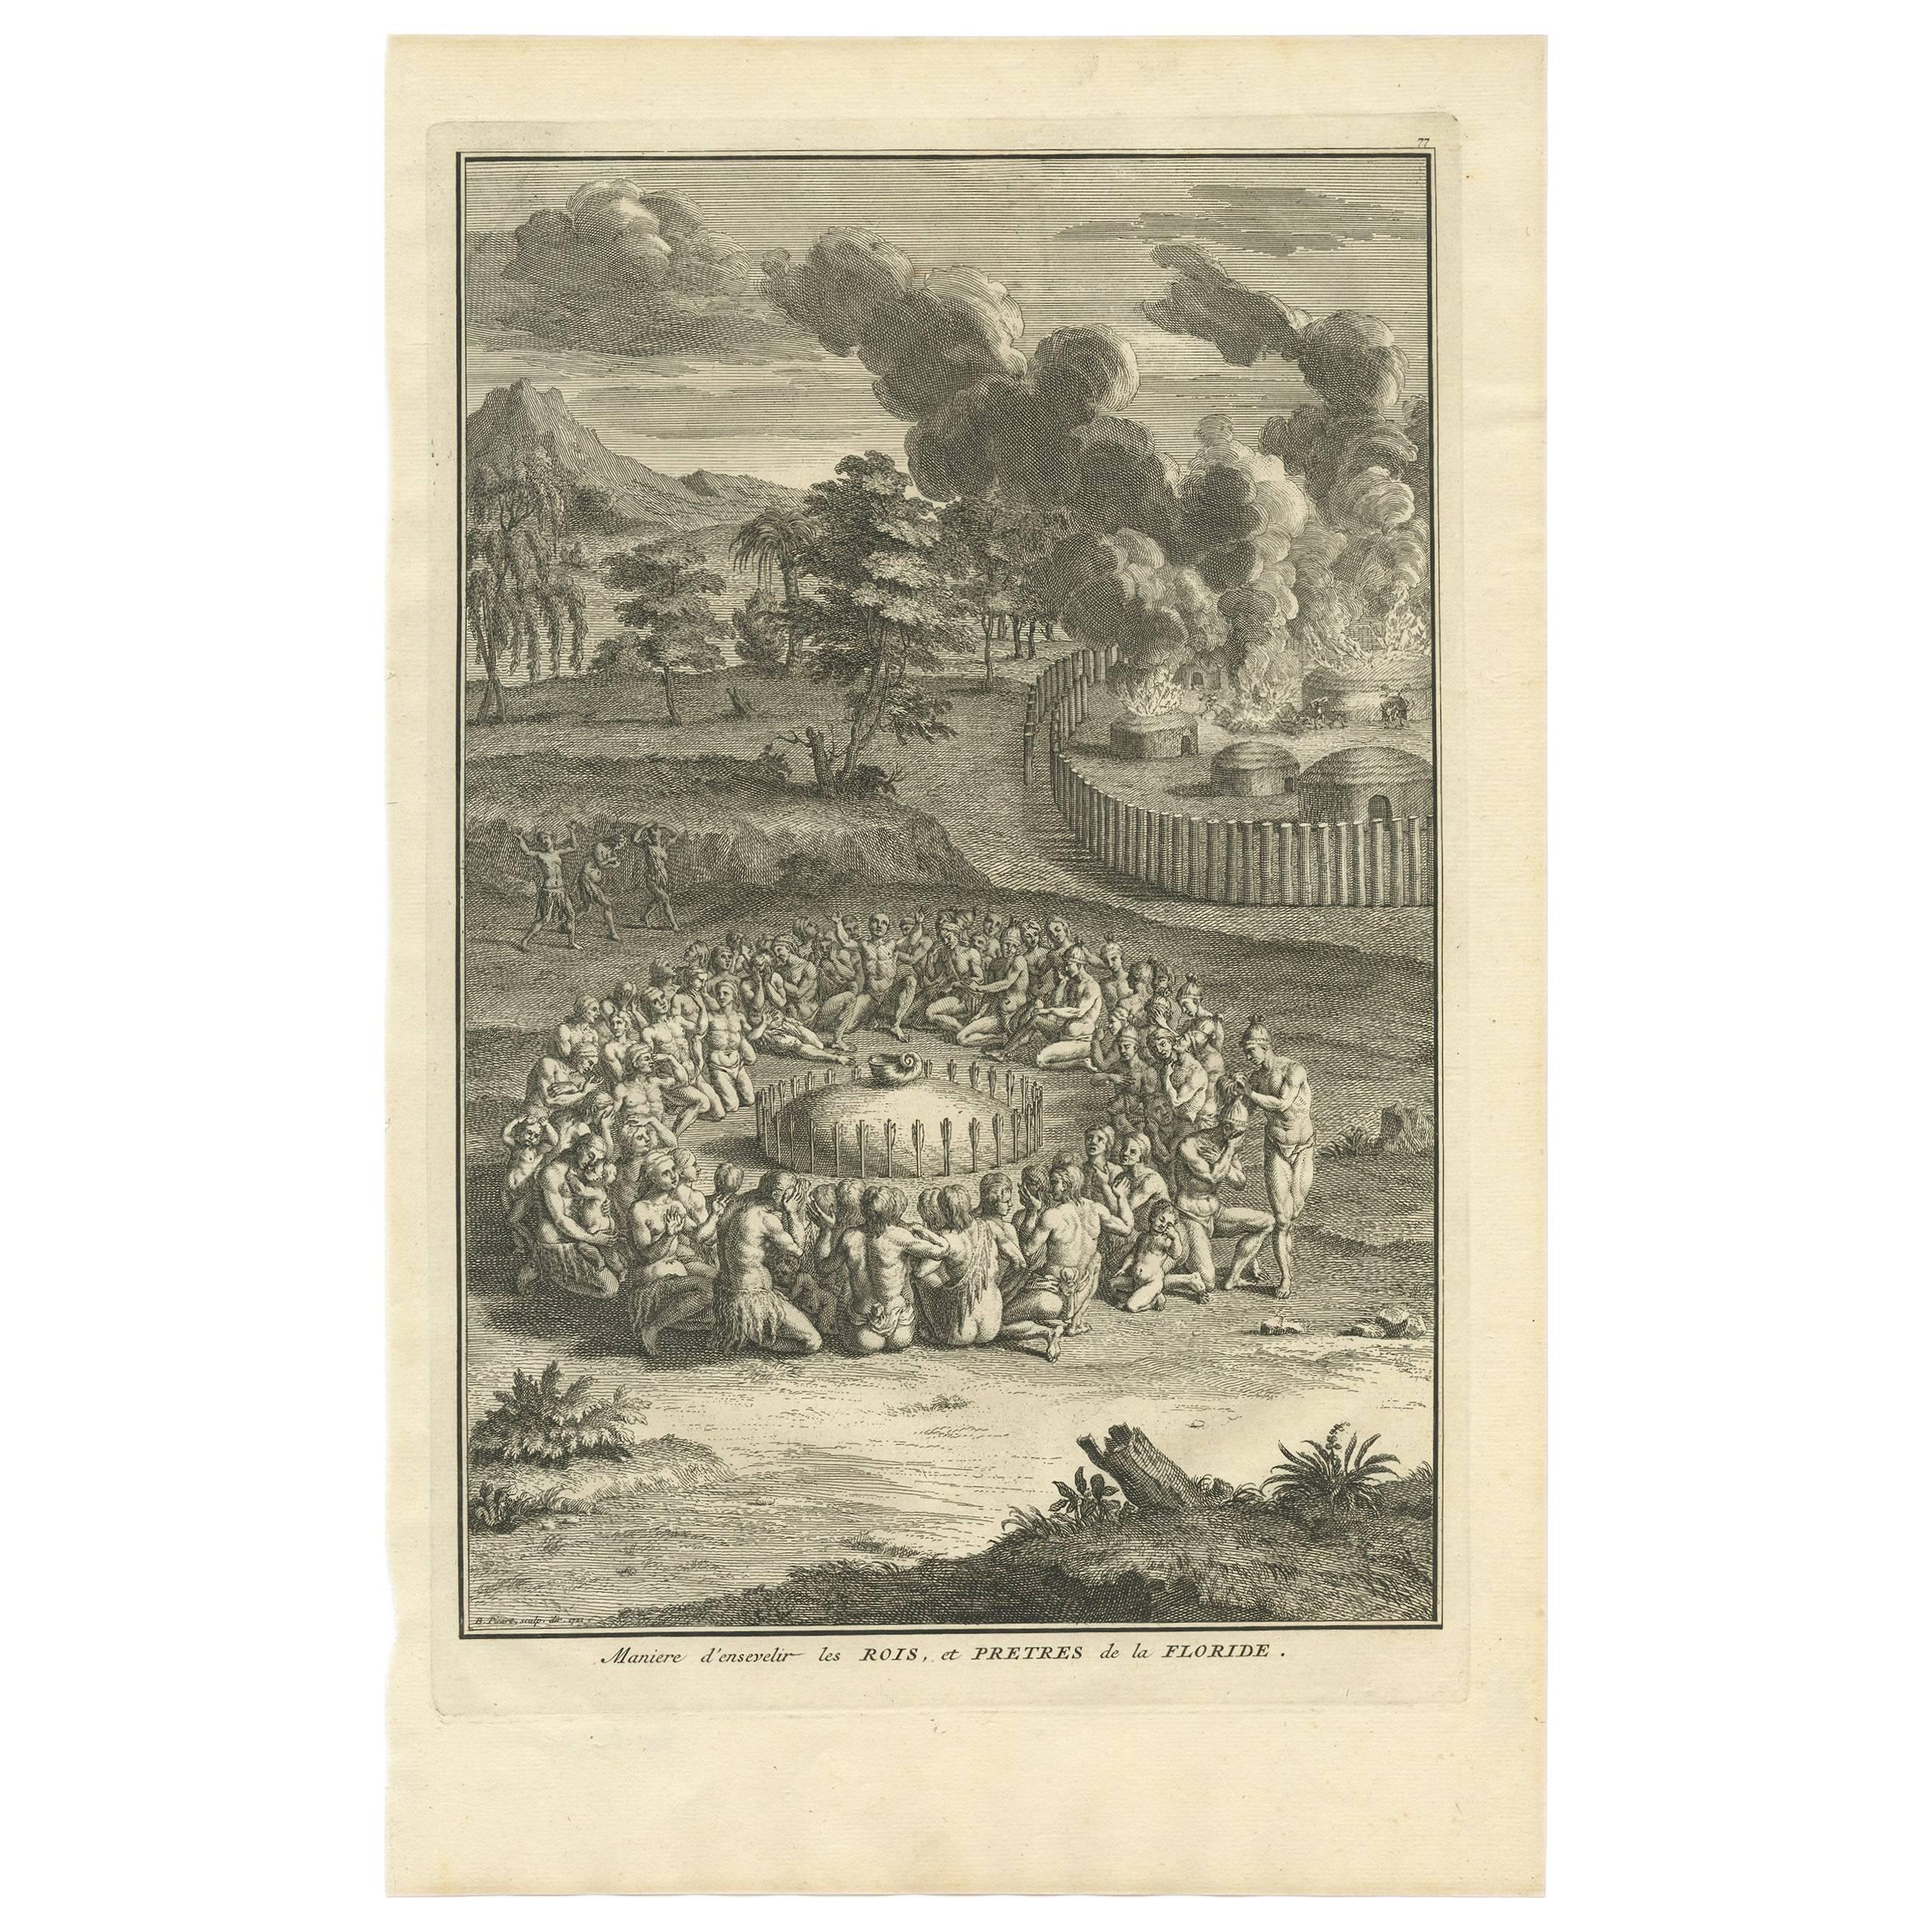 Antique Print of the Burying Ceremony of Kings and Priests of Florida